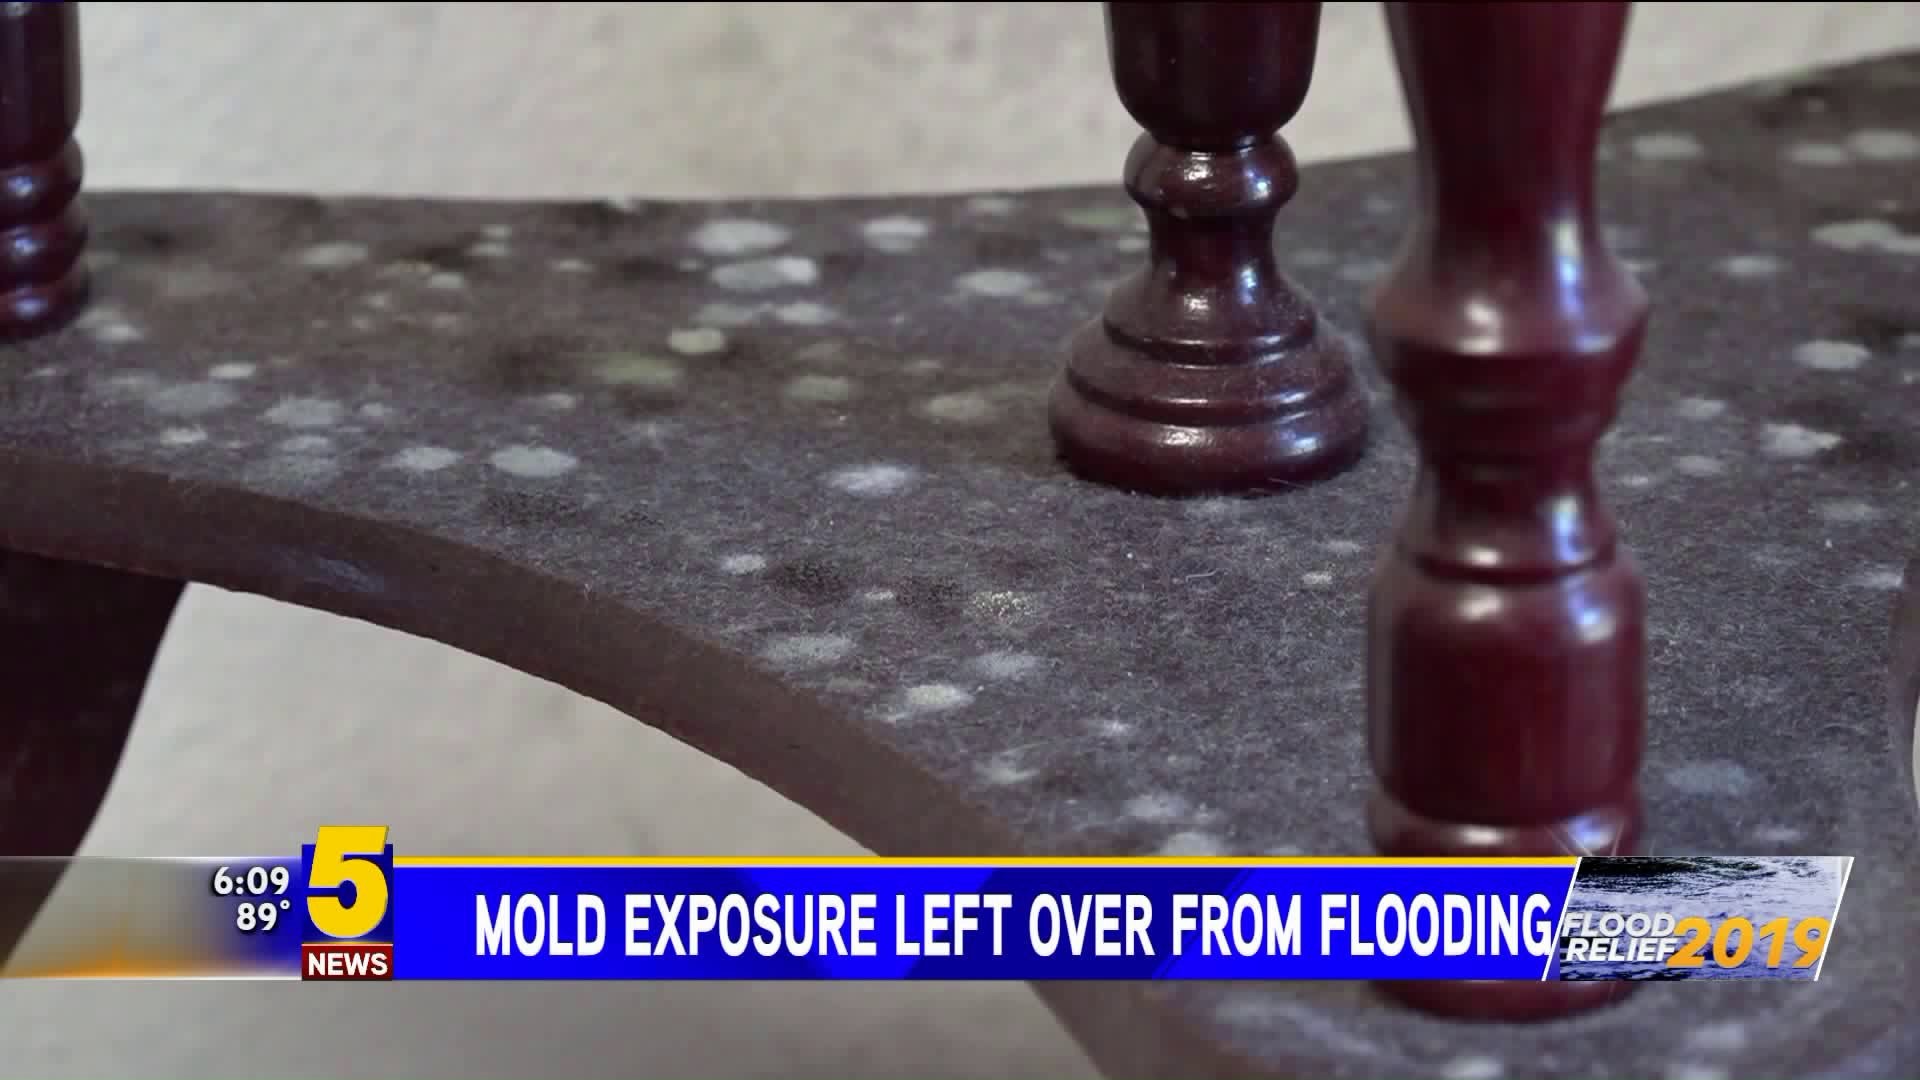 Mold Exposure Left Over From Flooding